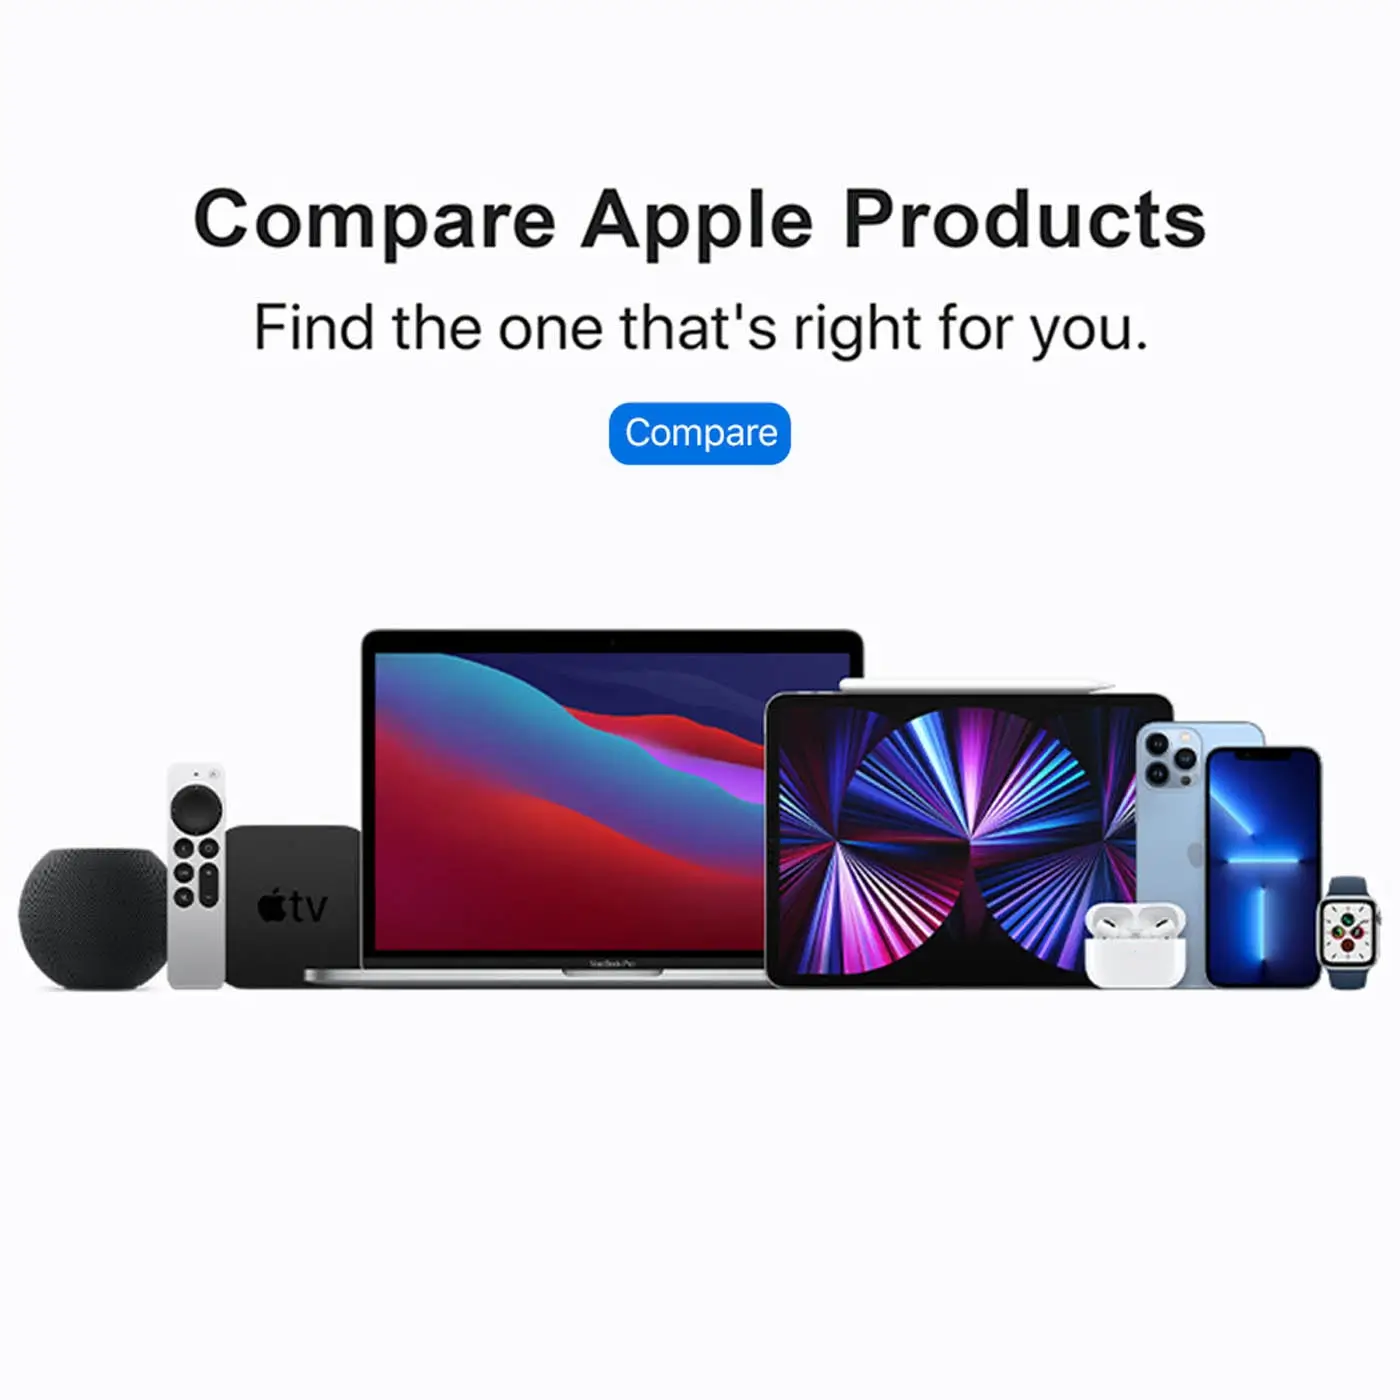 Compare Apple Products - Apple Store